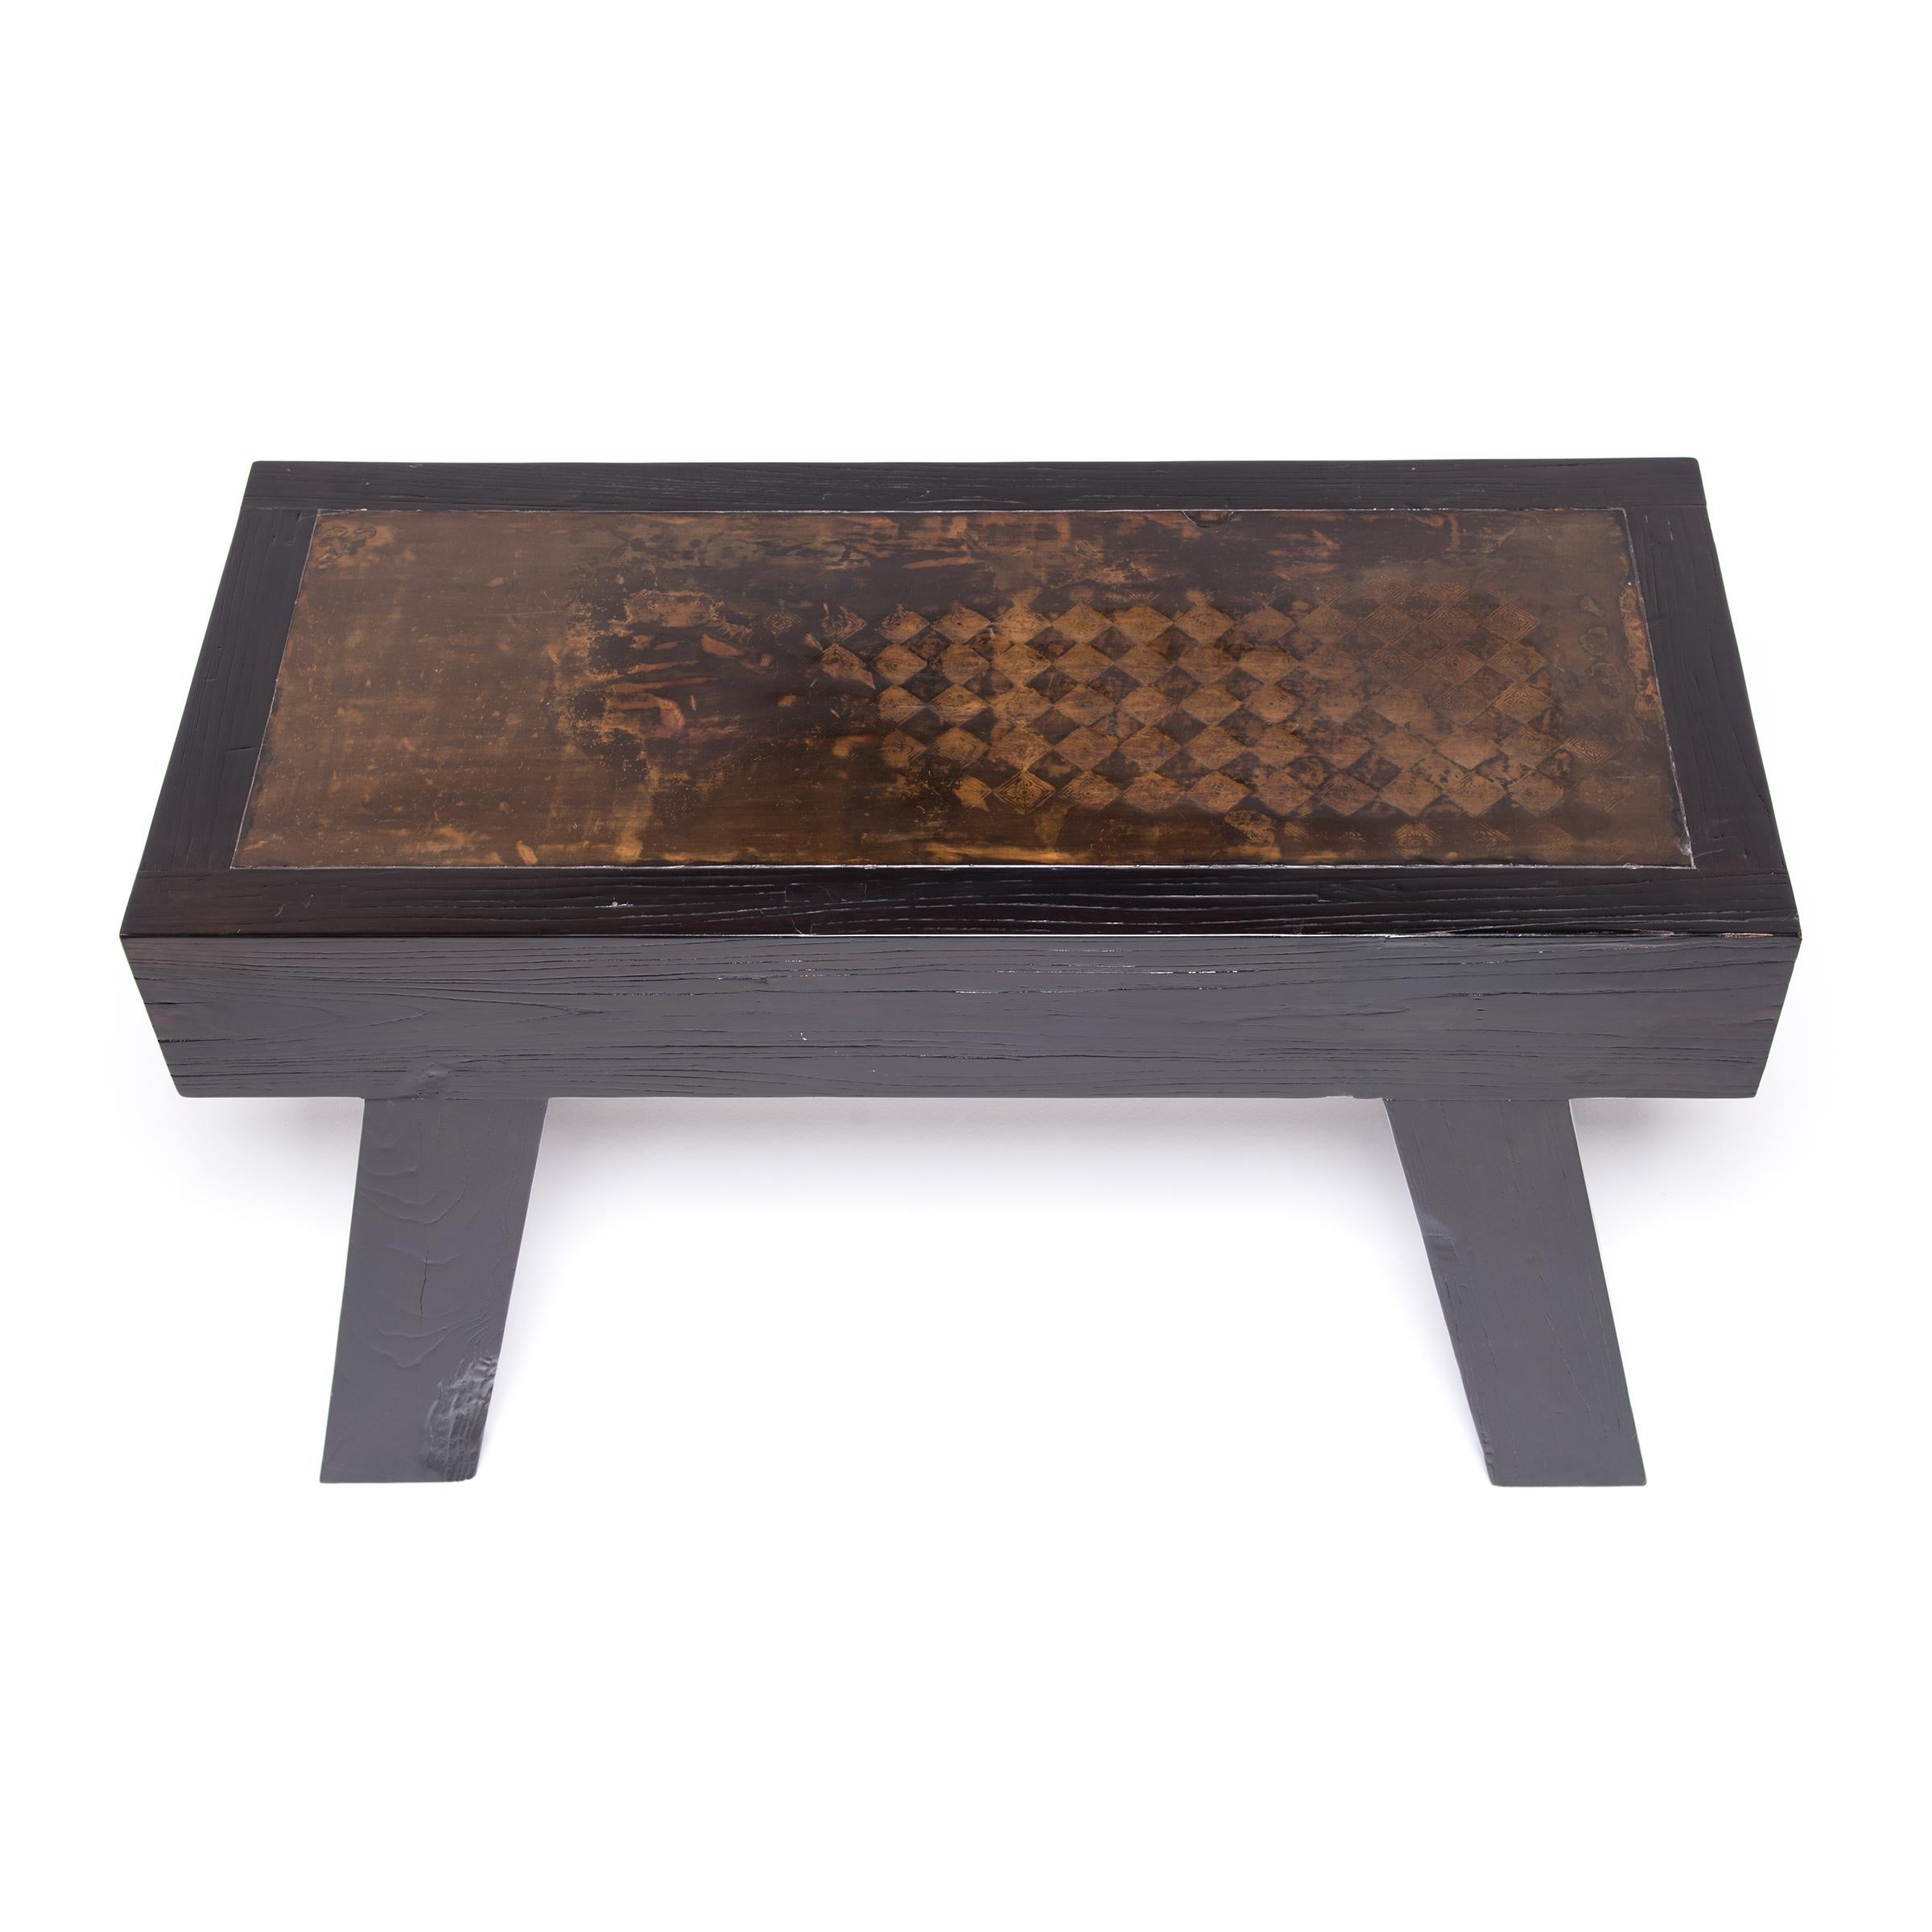 Topped with a 19th-century decorative architectural tile, this statement table brings together modern functionality with ancient tradition. The incised earthenware top resembles a weiqi game board, the ancient strategy game traditionally practiced